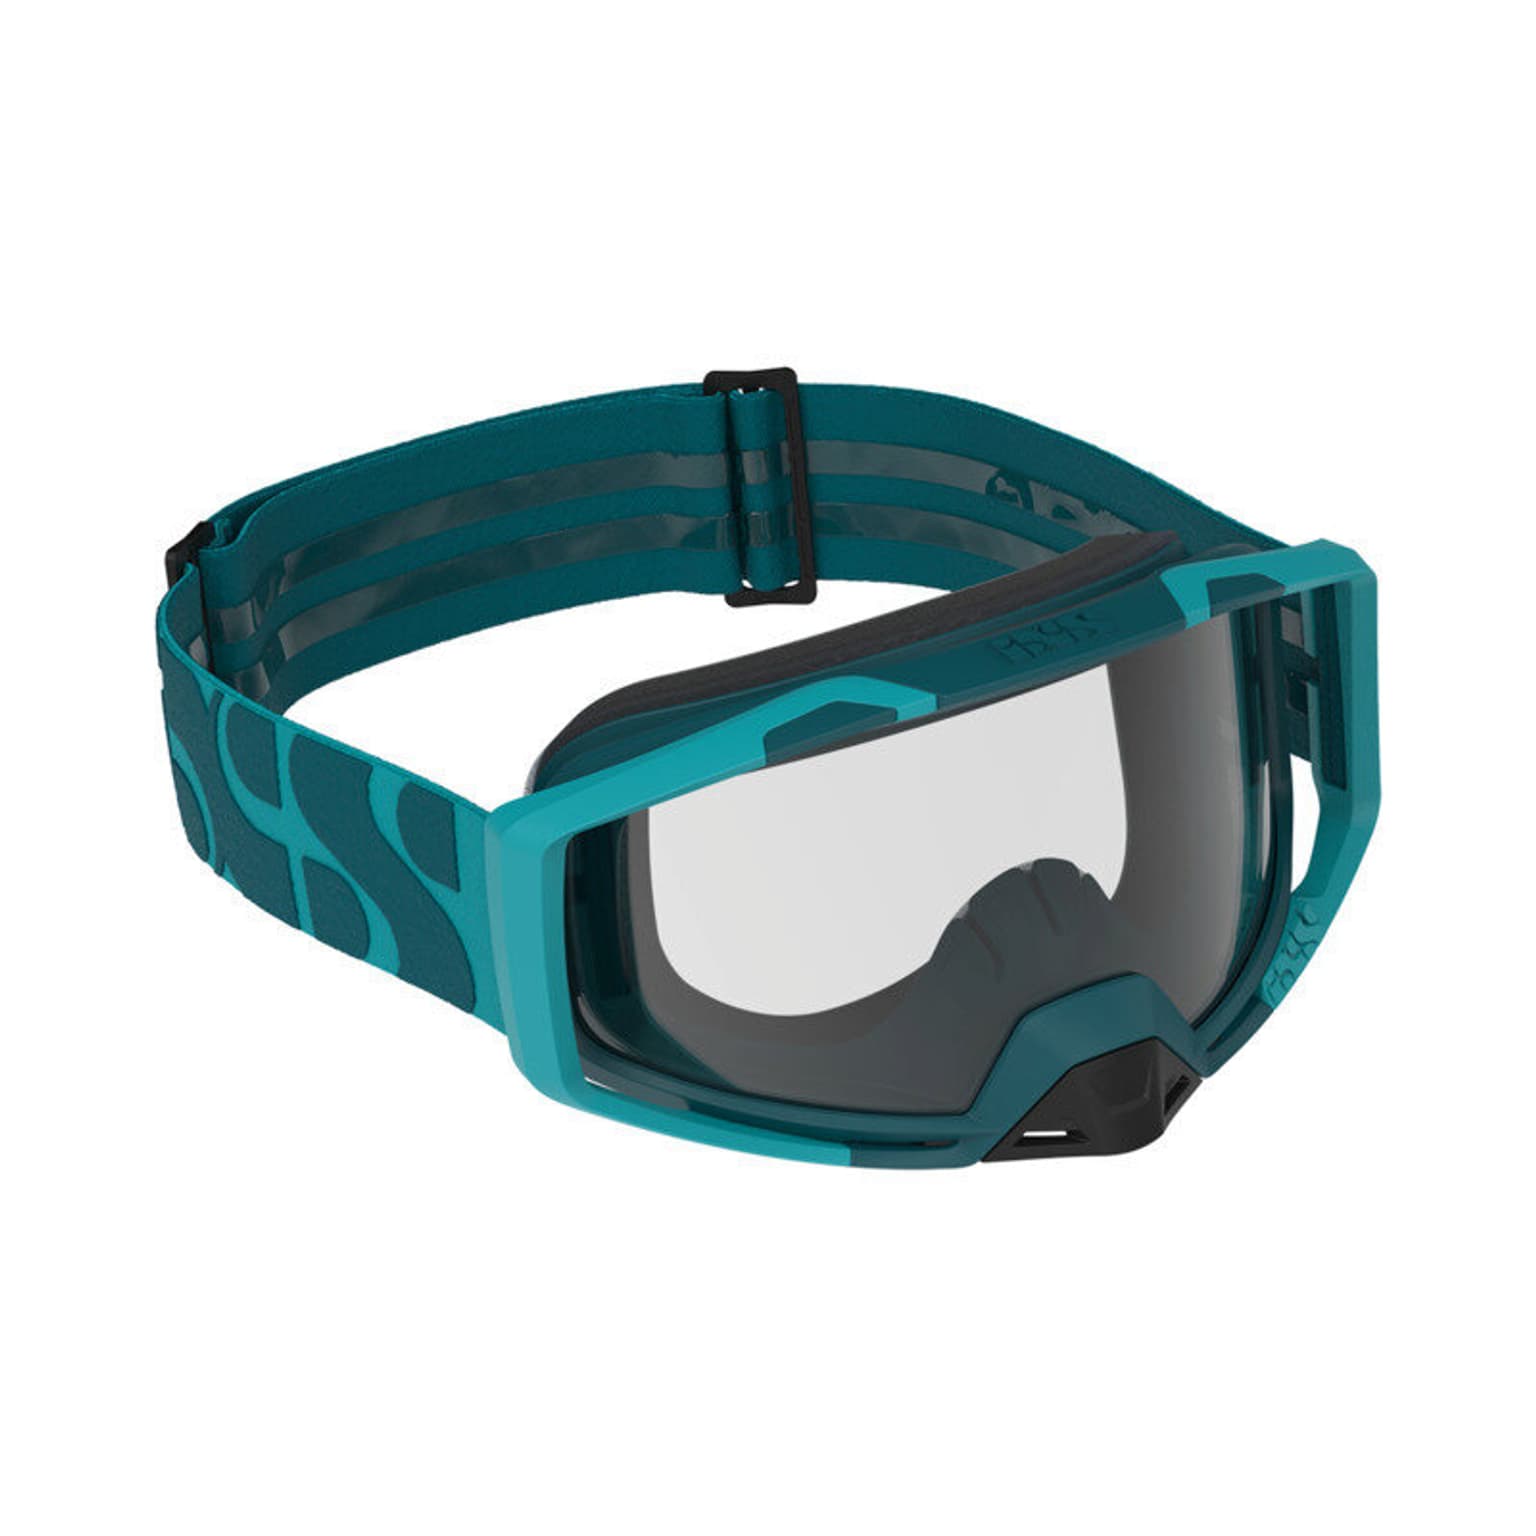 iXS iXS Trigger clear Lunettes VTT turquoise 1